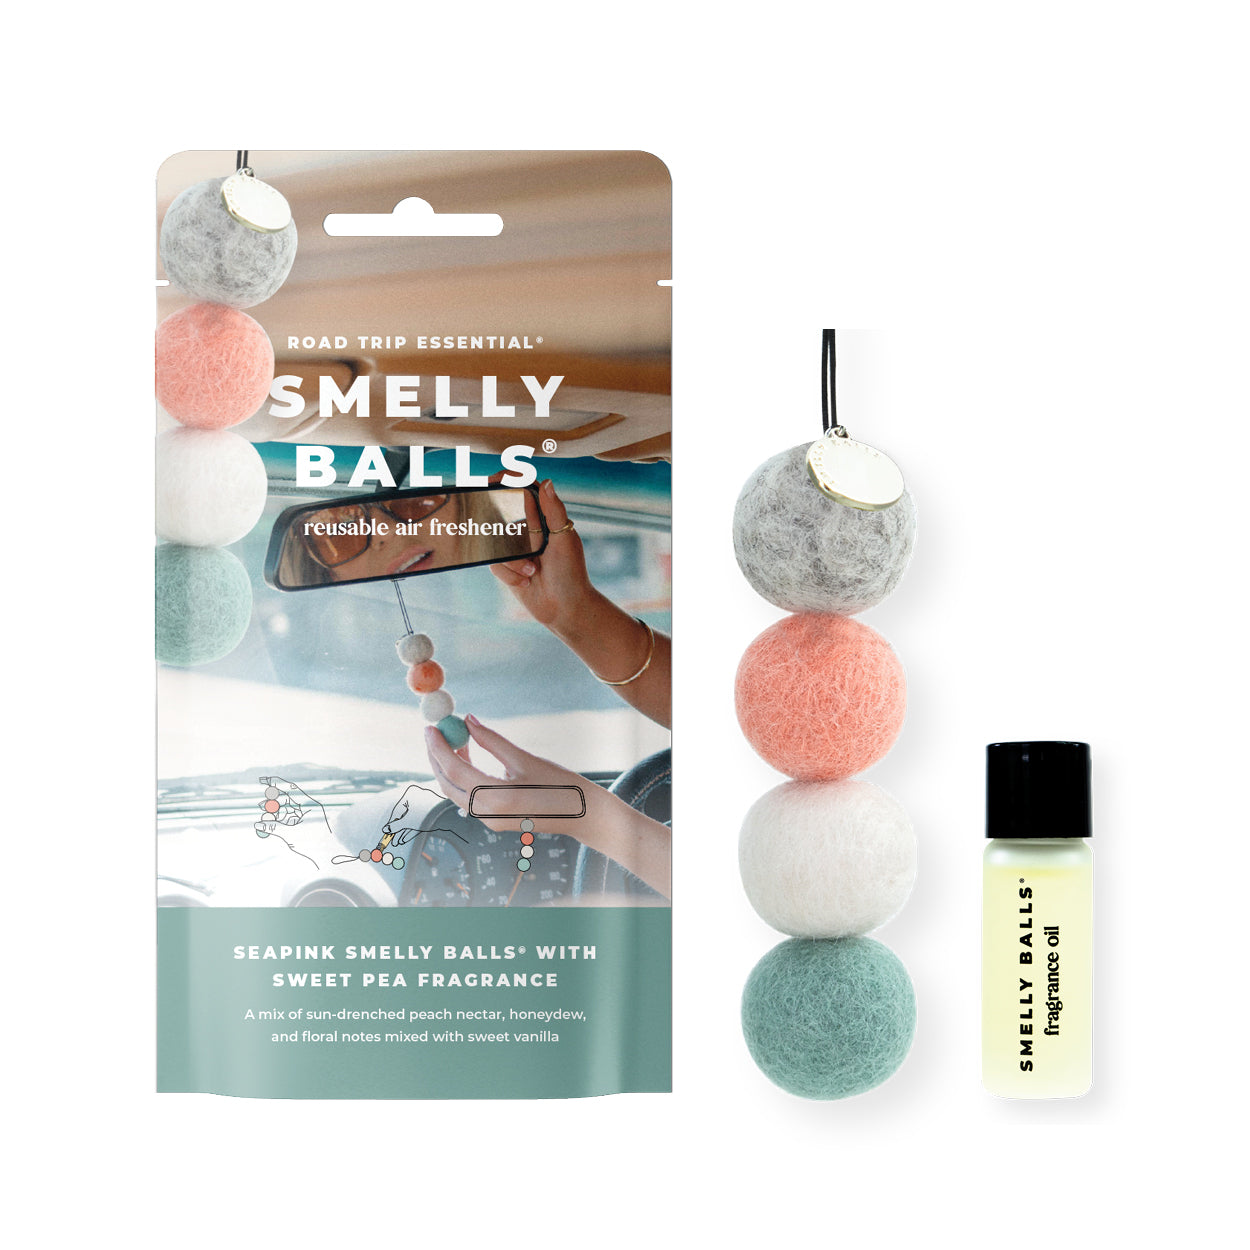 Smelly Balls Seapink Sweet Pea Set